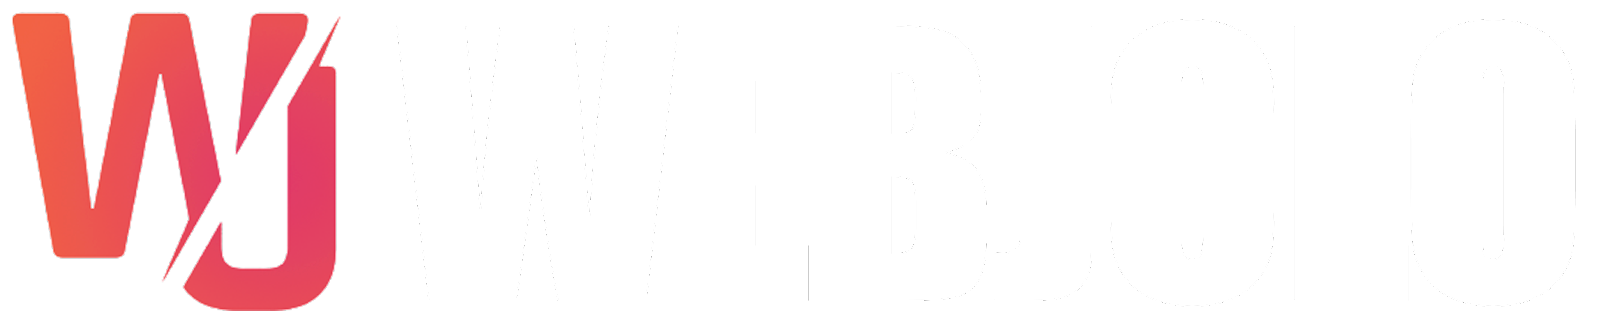 Webjolo - The Brand Makers